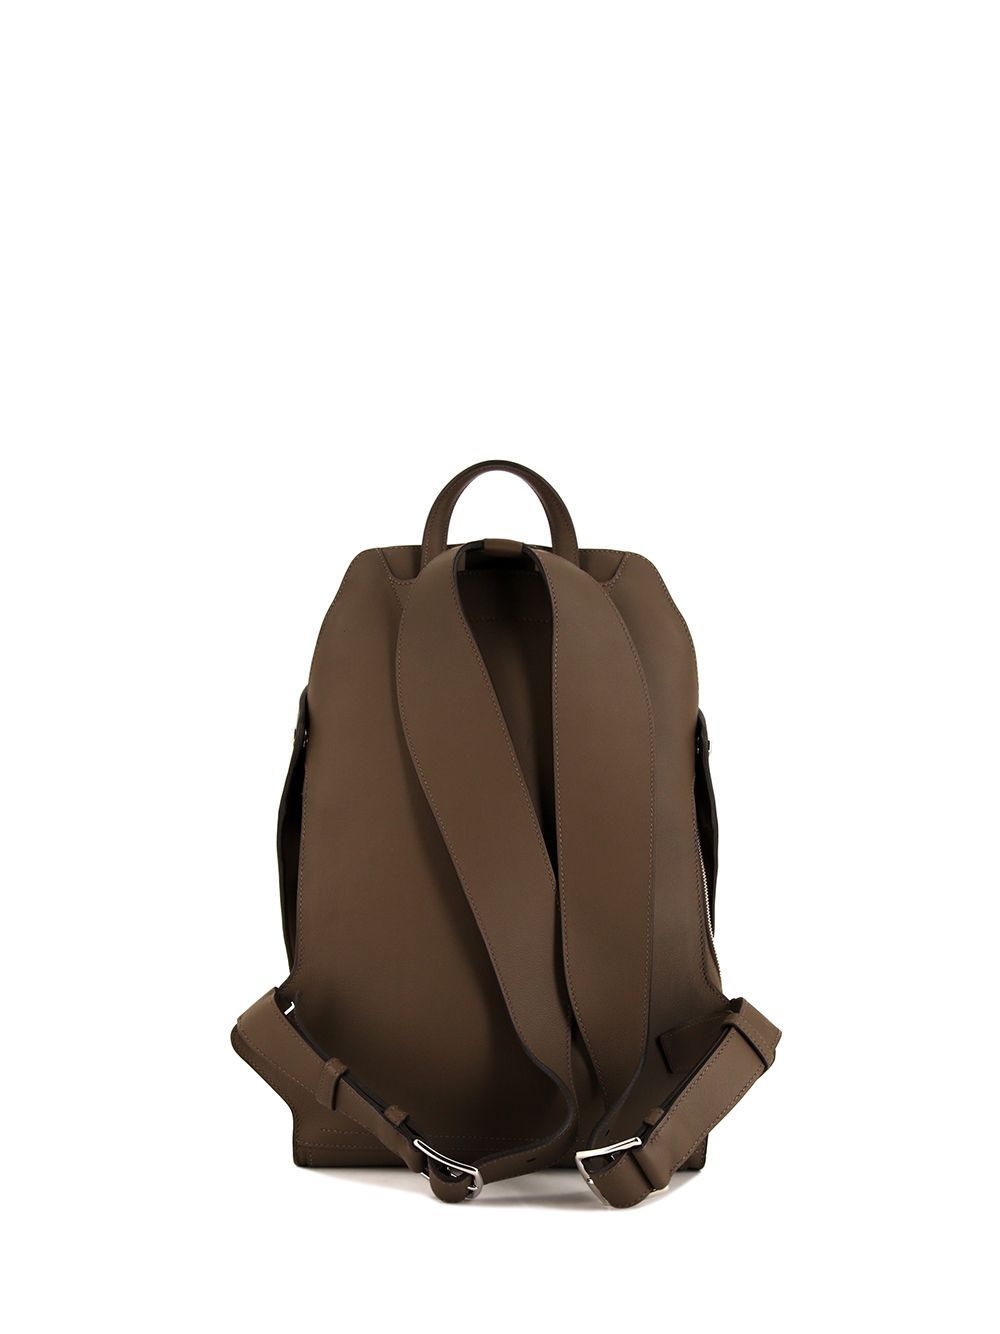 Hermès Cityback 27 men's leather backpack in taurillon cristobal: Detailed  review & try-on 